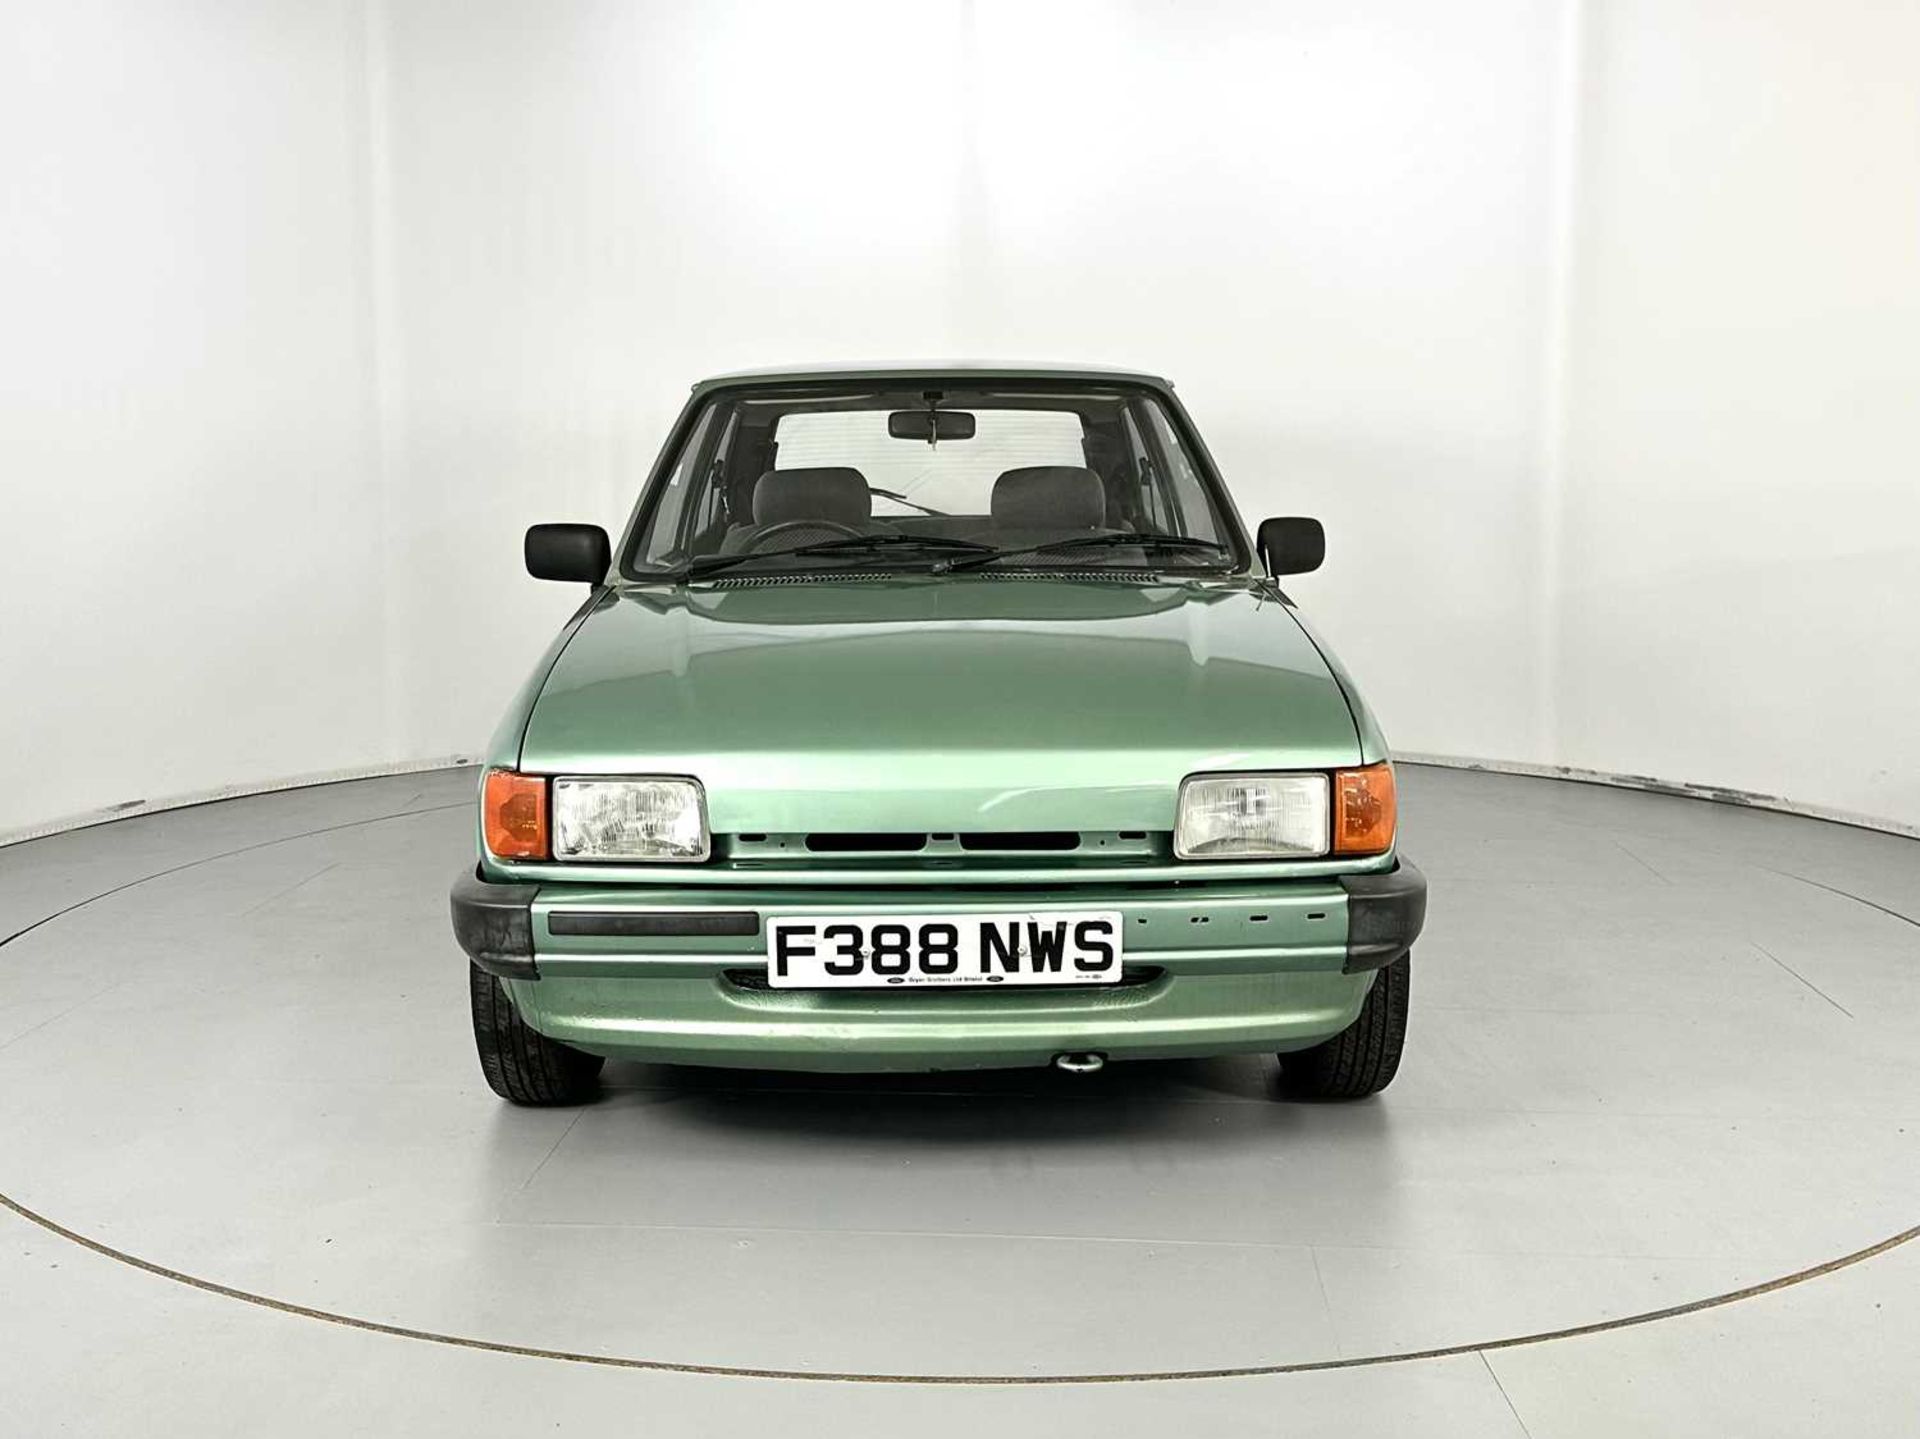 1988 Ford Fiesta - Image 2 of 30